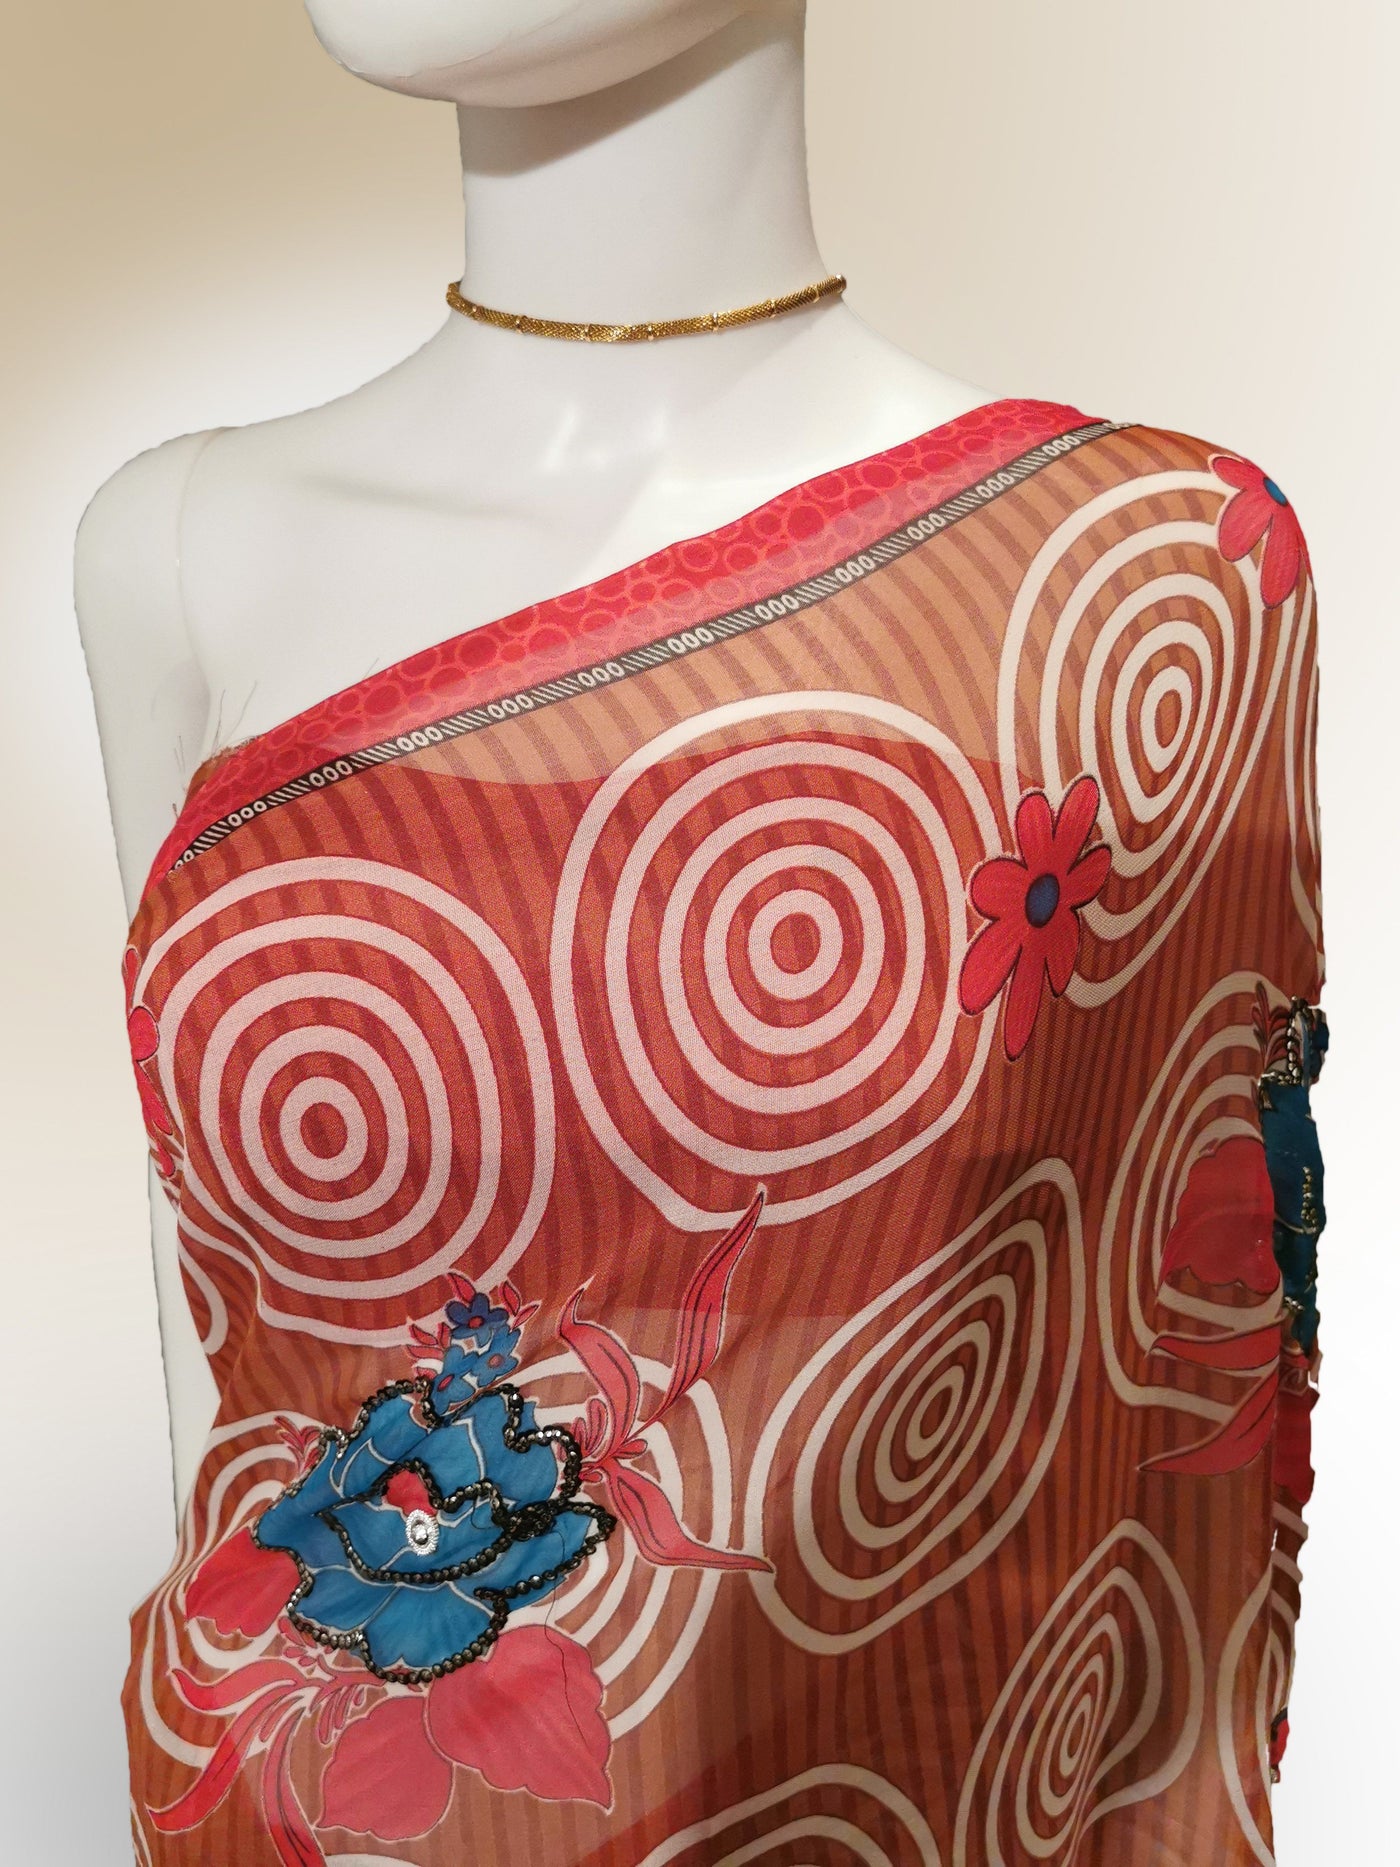 Saree in Tomato Red and Blue Floral with Sequin and Print Work Indian Clothing in Denver, CO, Aurora, CO, Boulder, CO, Fort Collins, CO, Colorado Springs, CO, Parker, CO, Highlands Ranch, CO, Cherry Creek, CO, Centennial, CO, and Longmont, CO. NATIONWIDE SHIPPING USA- India Fashion X